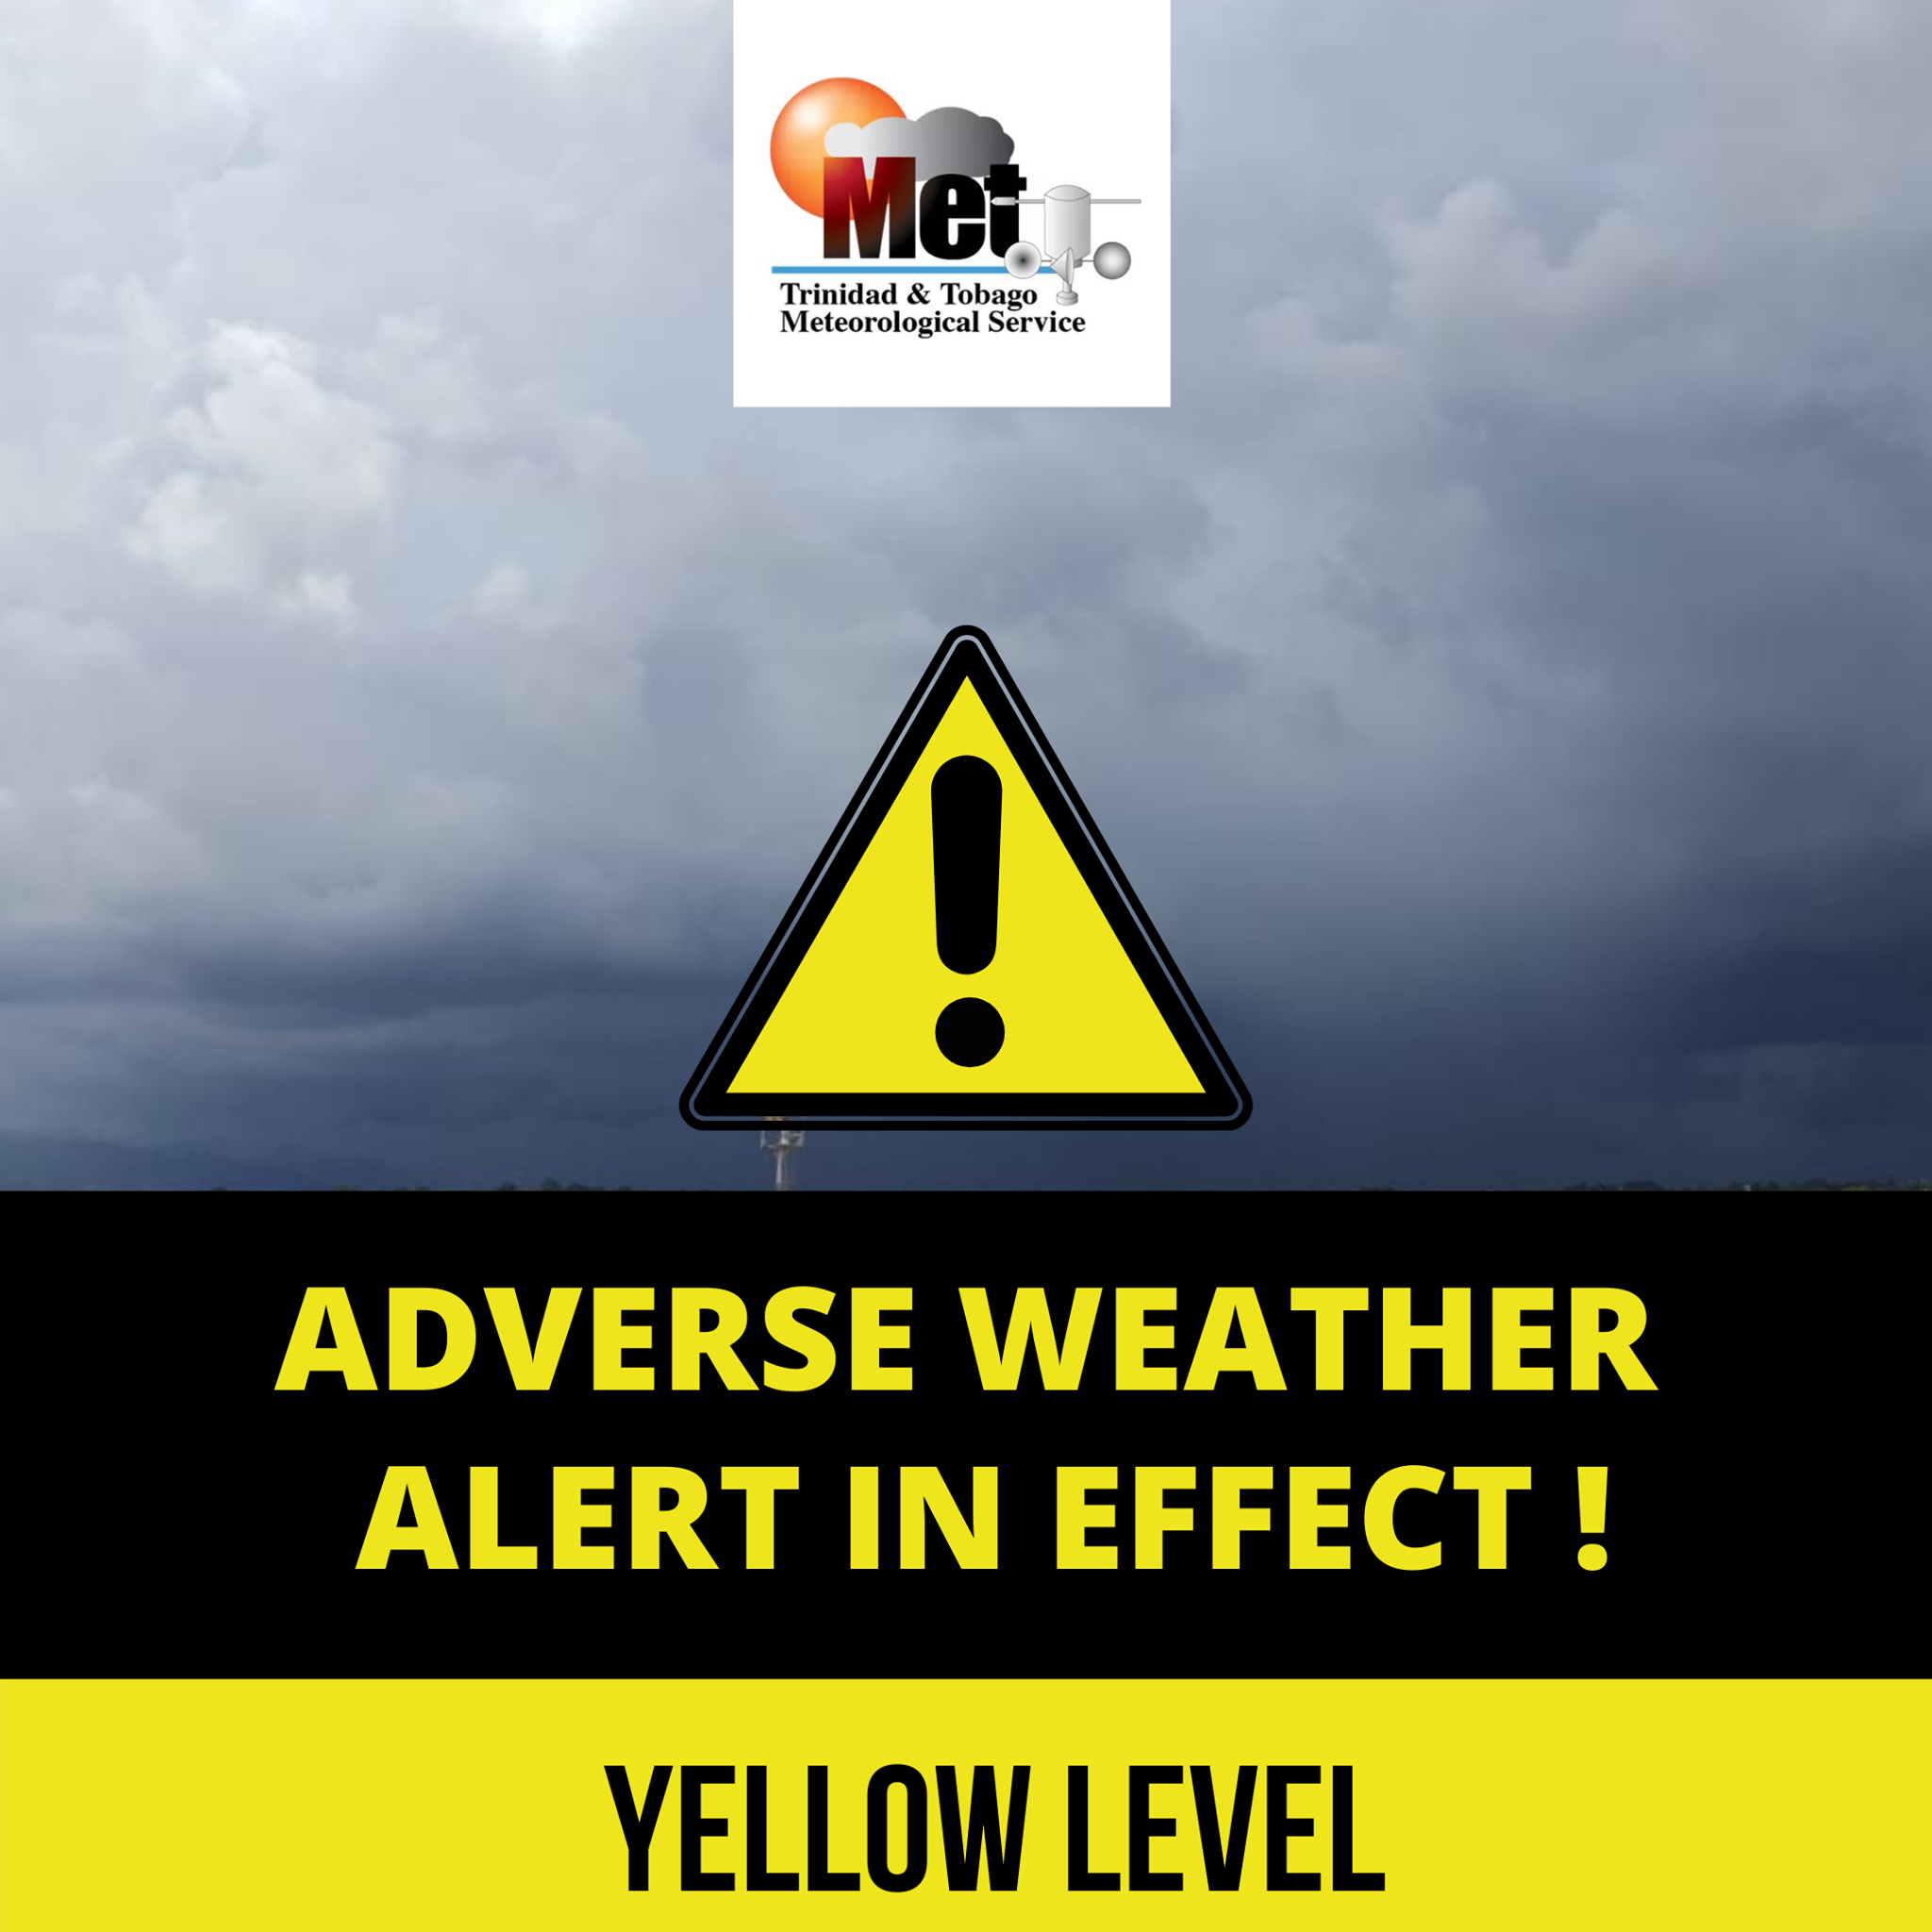 ADVERSE WEATHER ALERT #1 YELLOW LEVEL IN EFFECT!